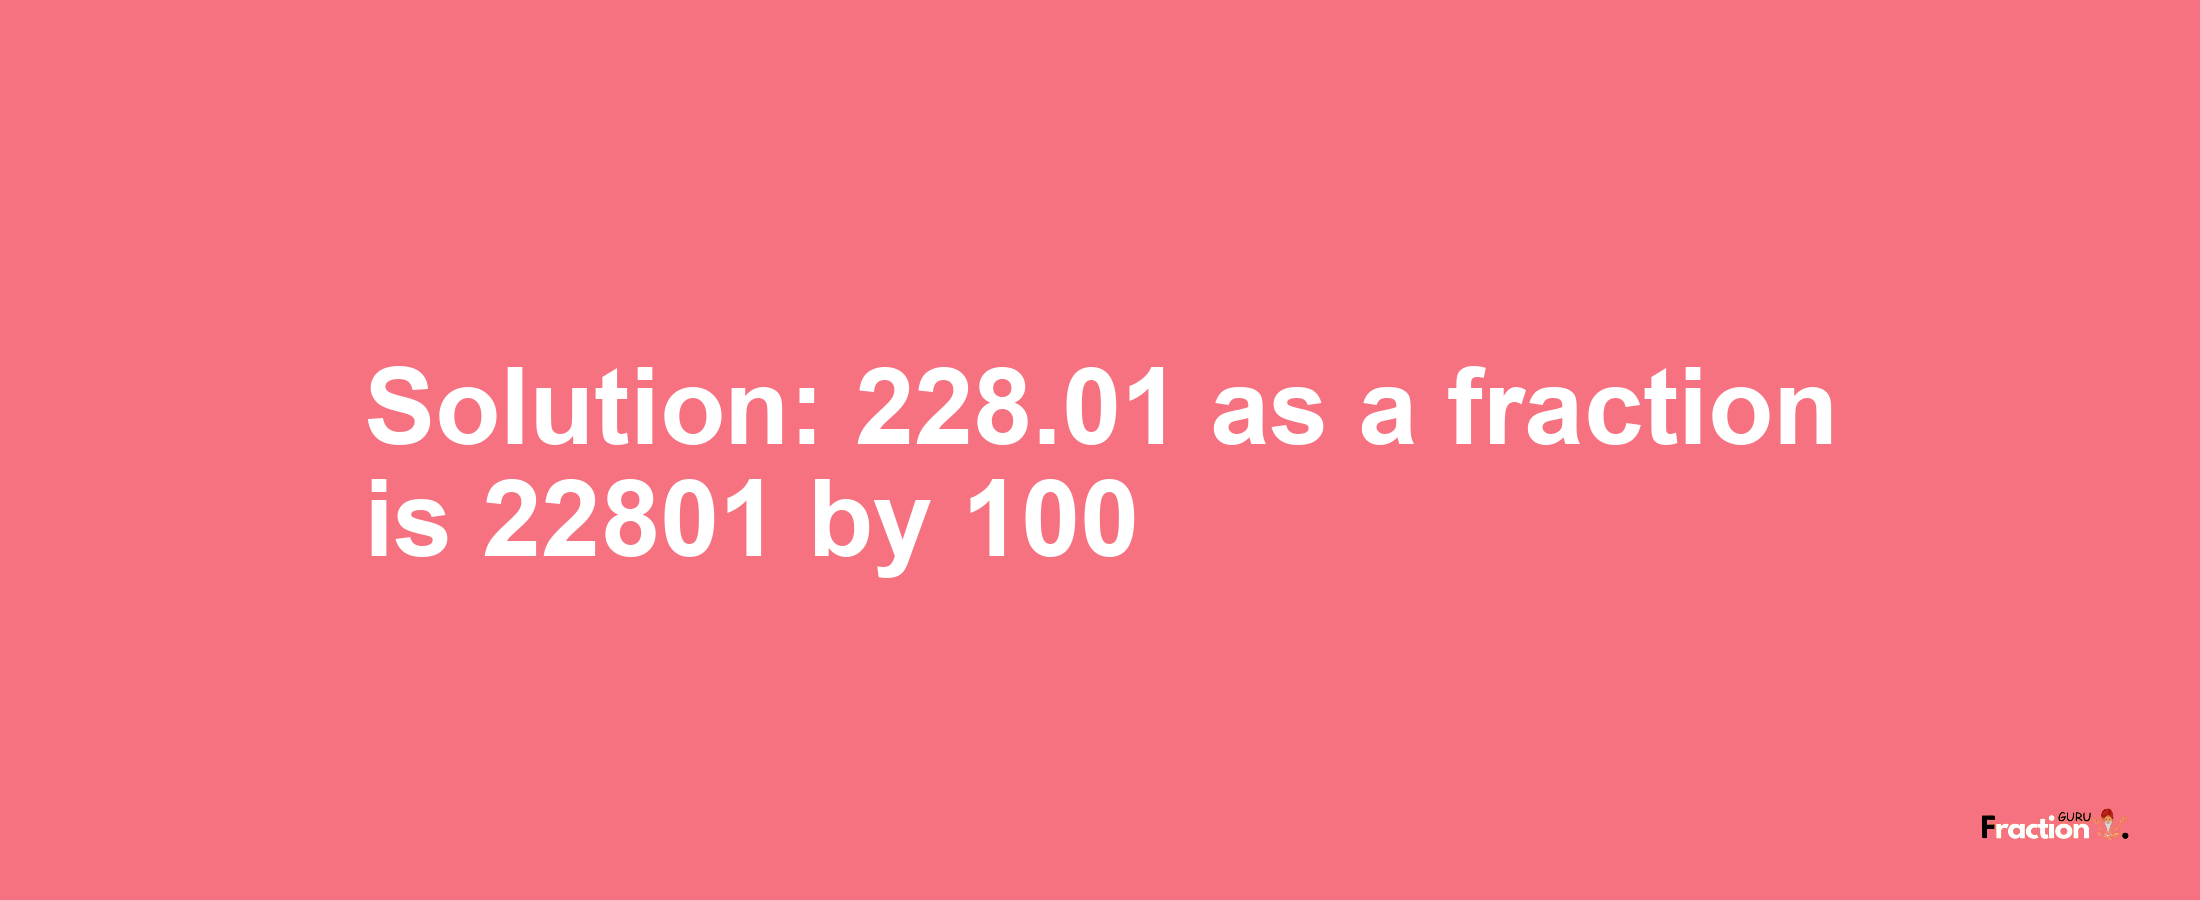 Solution:228.01 as a fraction is 22801/100